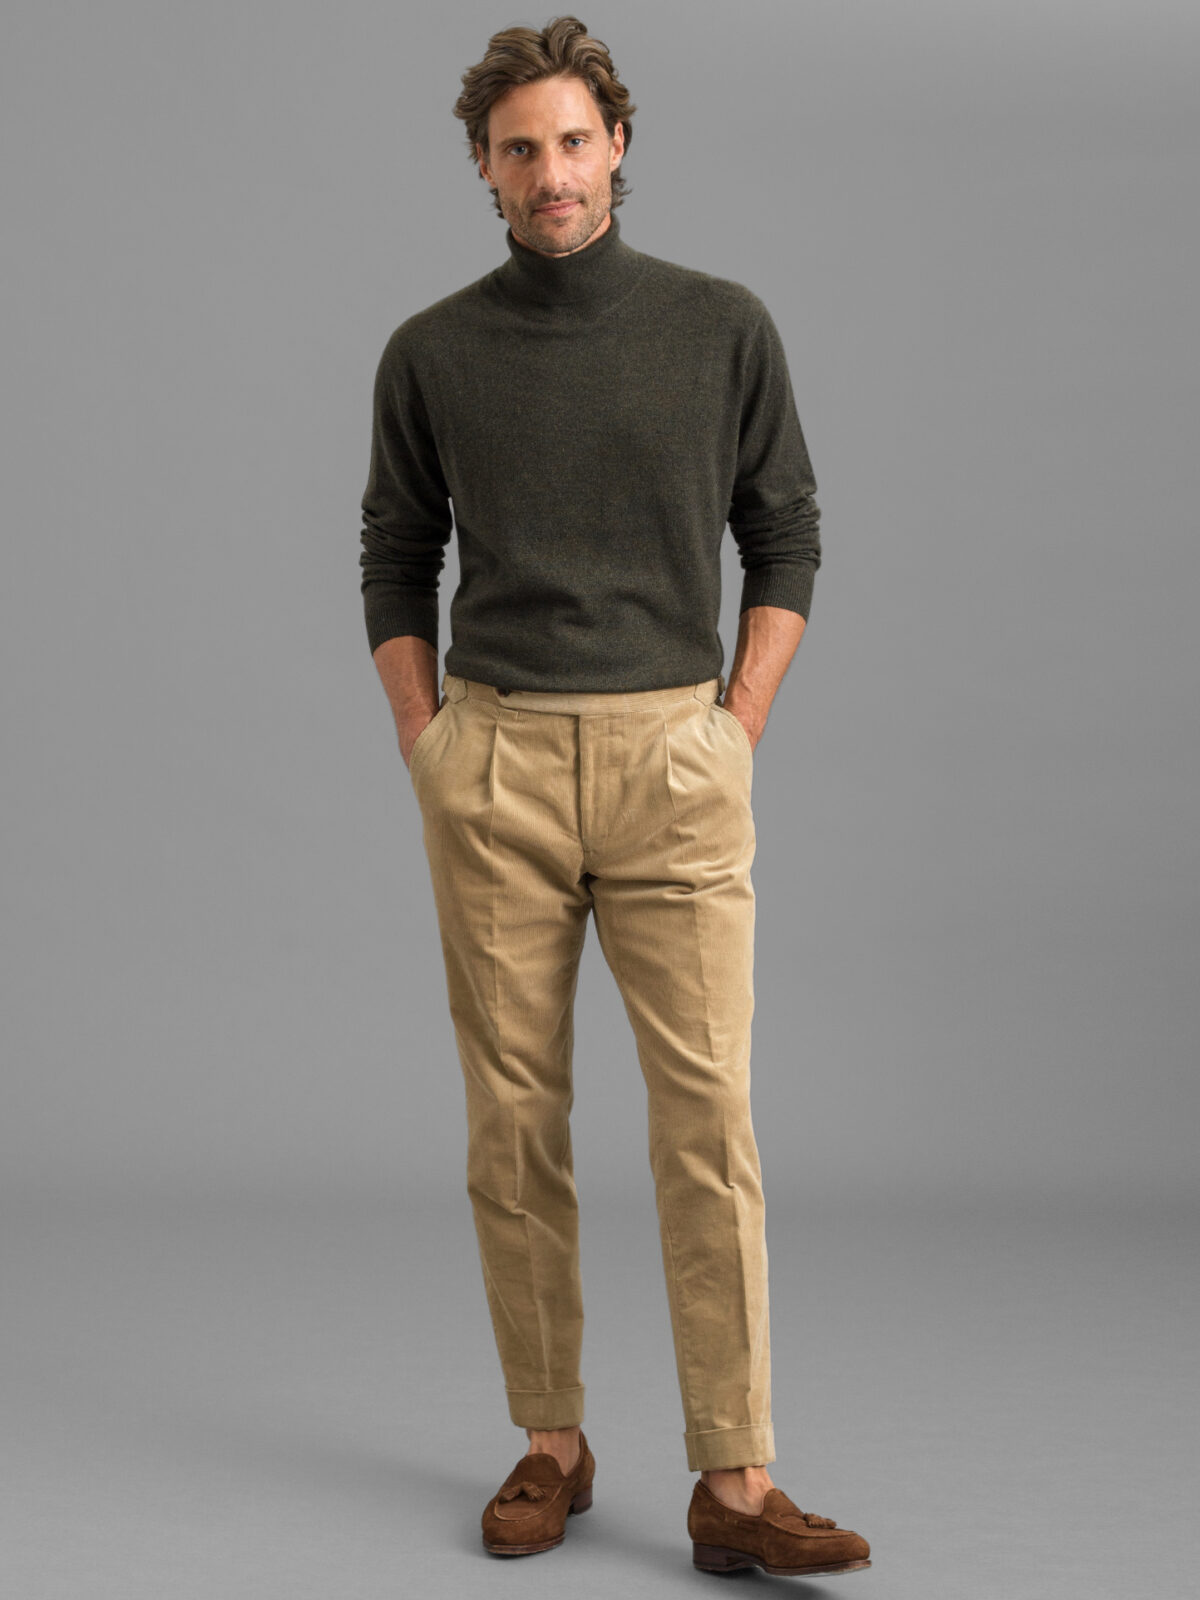 Pleated Beige Corduroy Stretch Dress Pant - Custom Fit Tailored